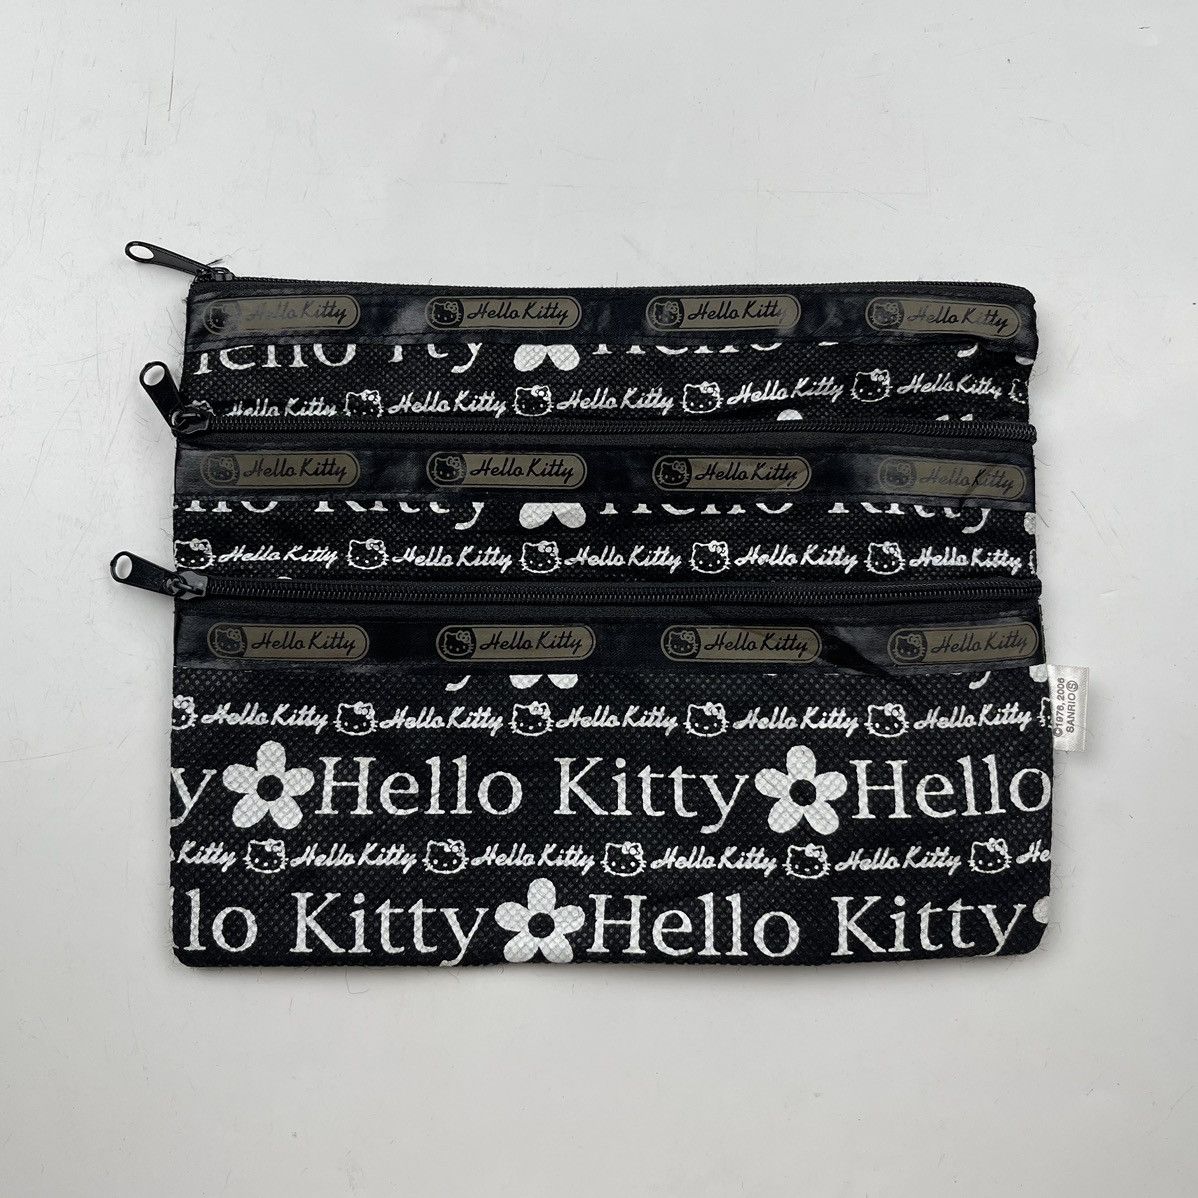 Japanese Brand - hello kitty bag small pouch tc24 - 1